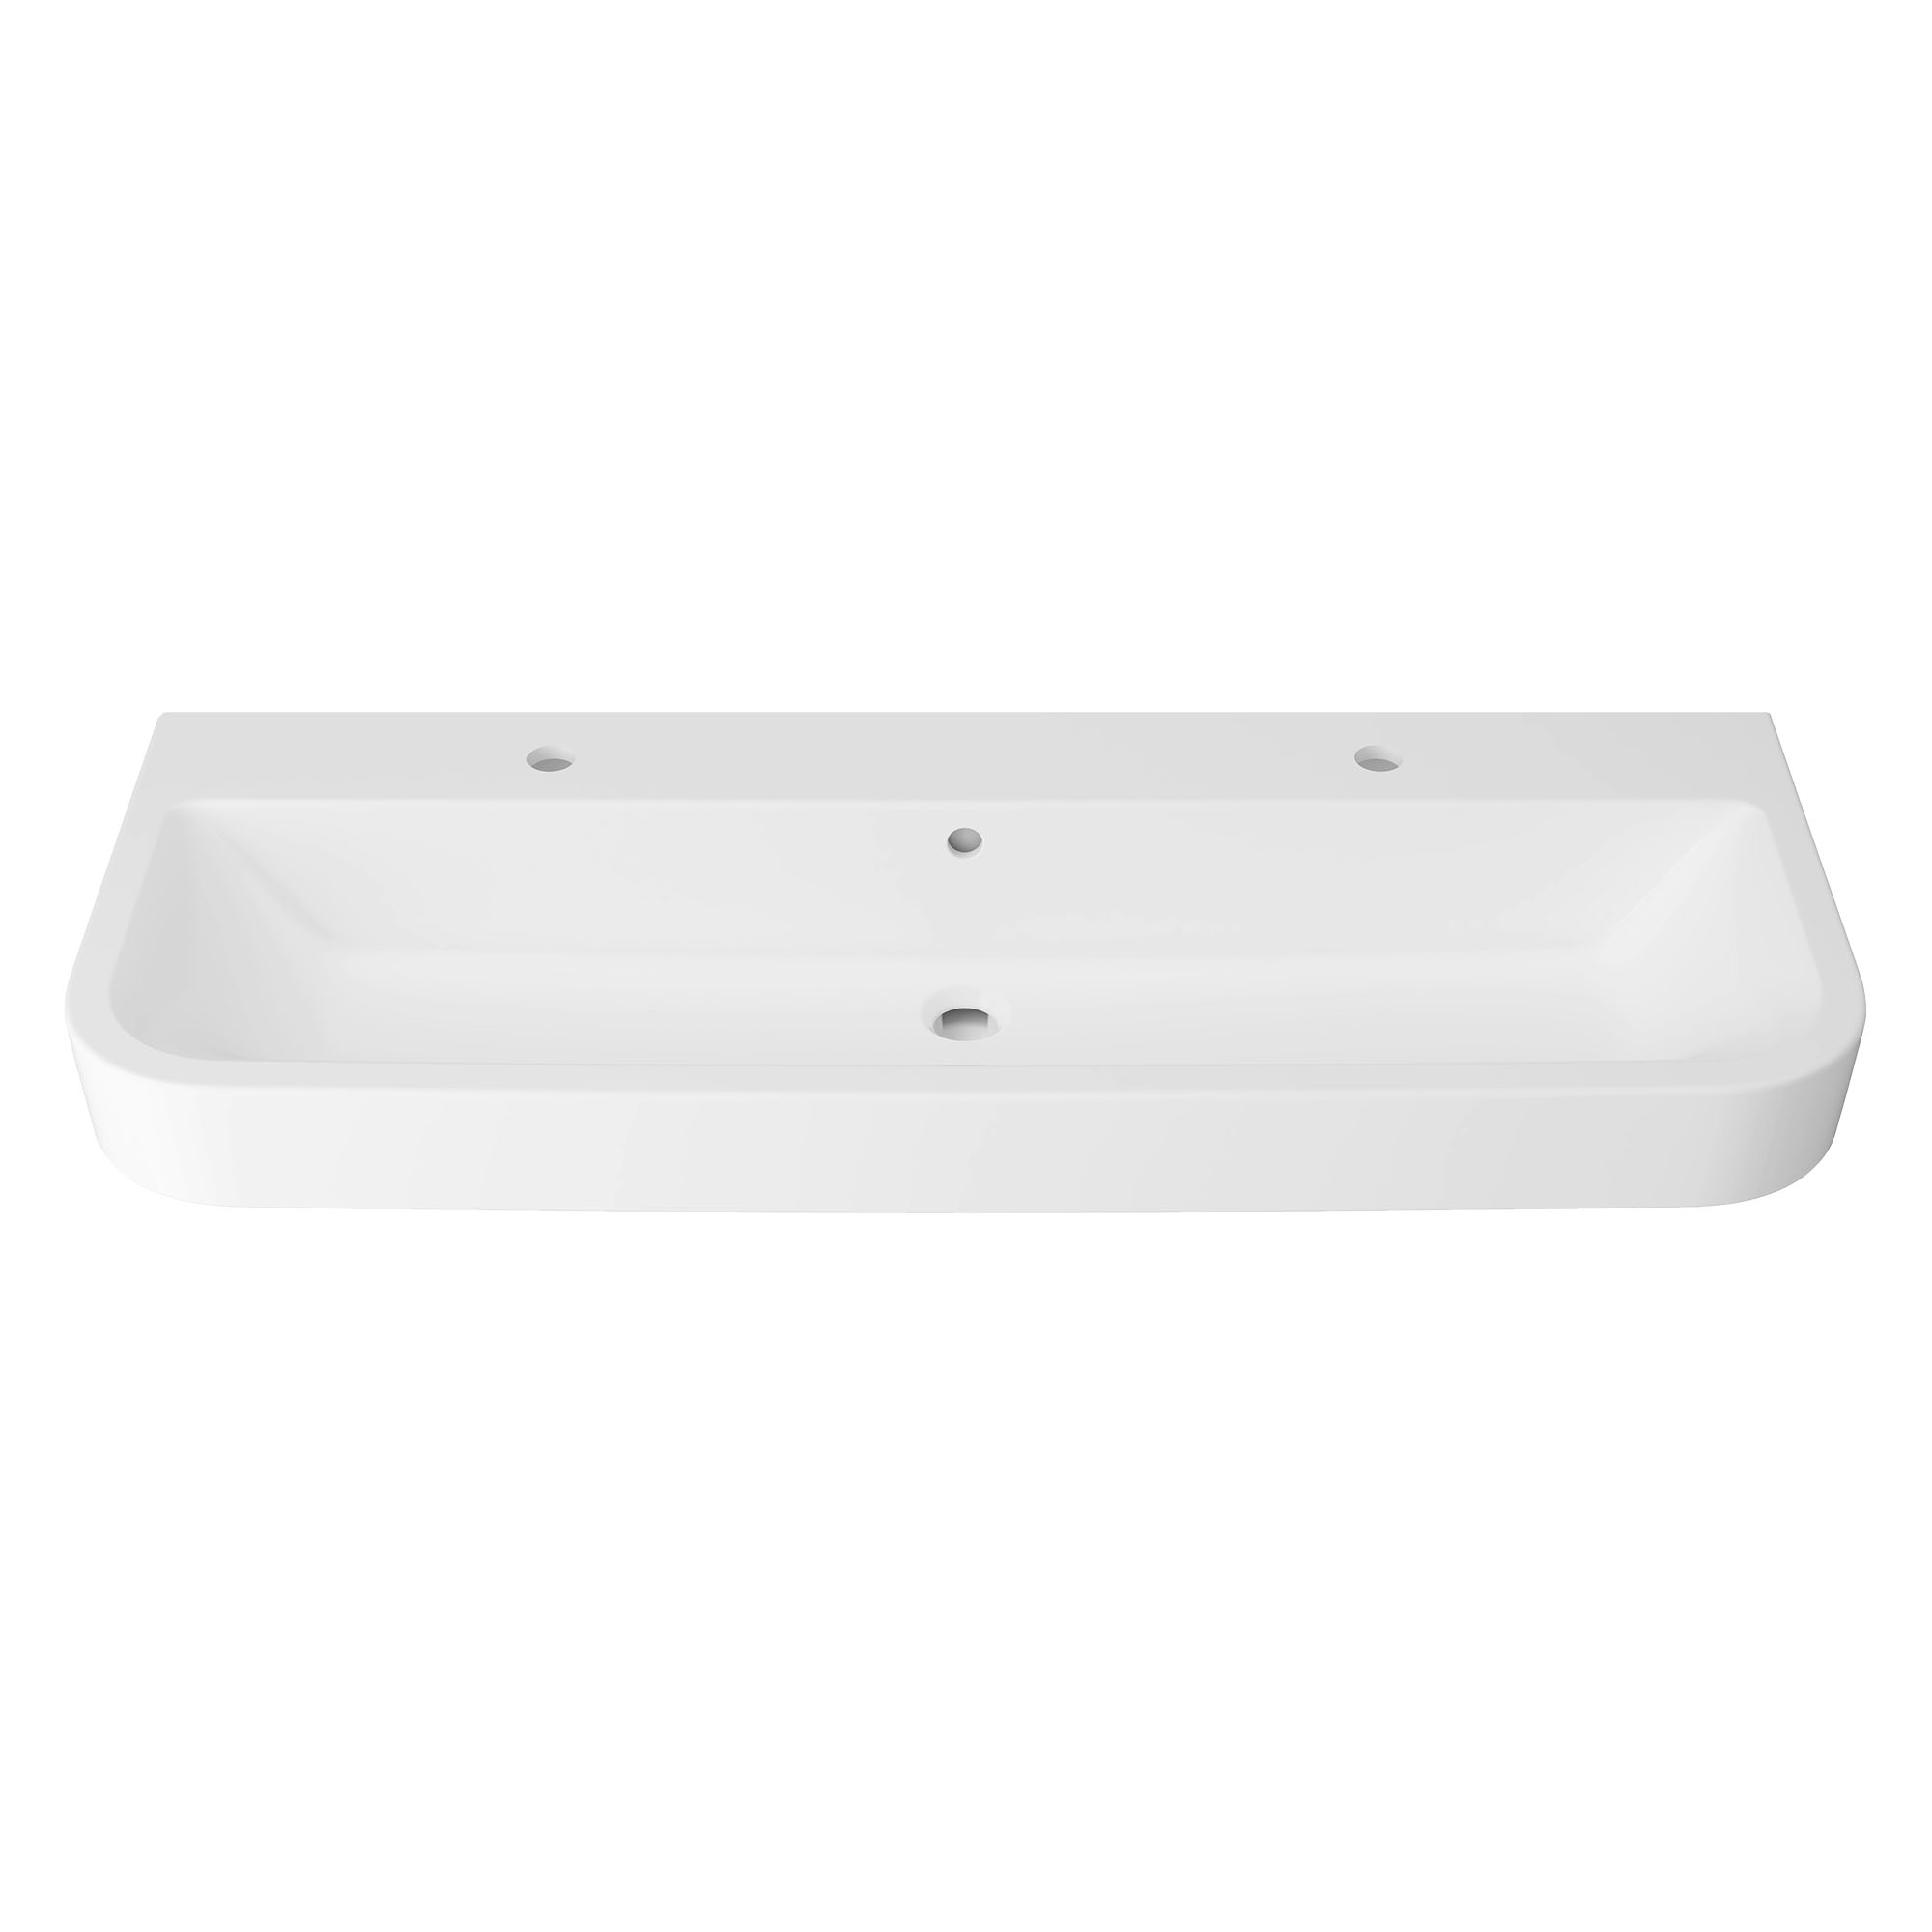 Equility® Wall-Hung Sink, 2 Single Hole